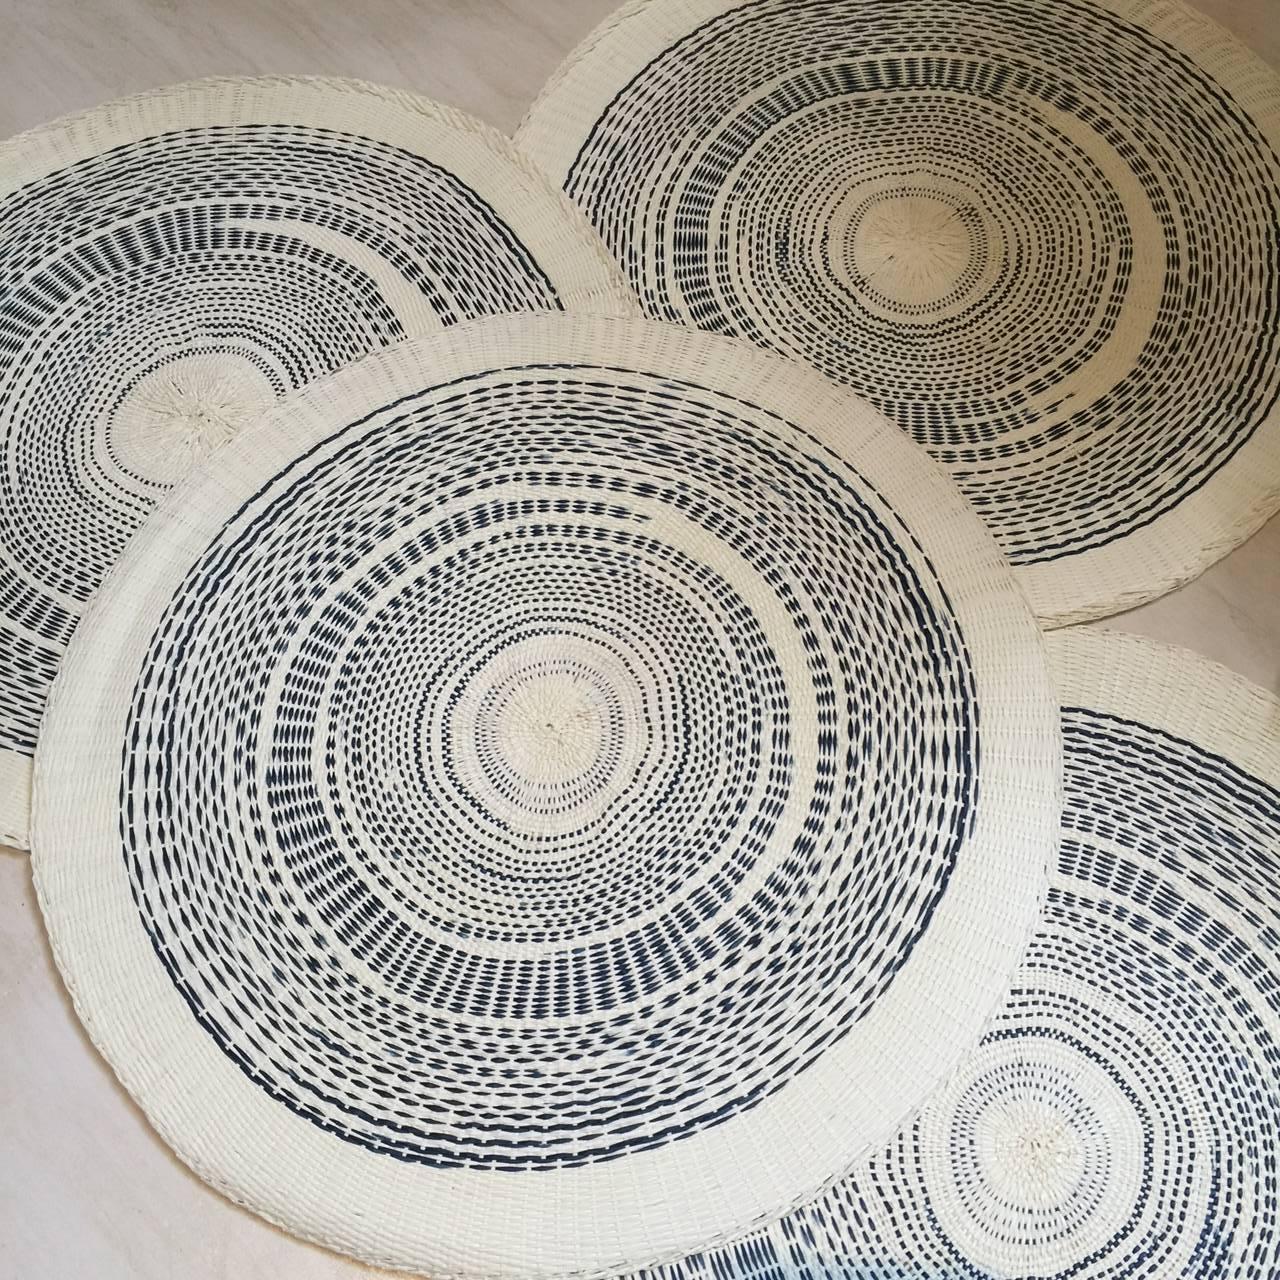 Indigo and ivory woven paper place mats in two designs, sold in sets of 4.
15